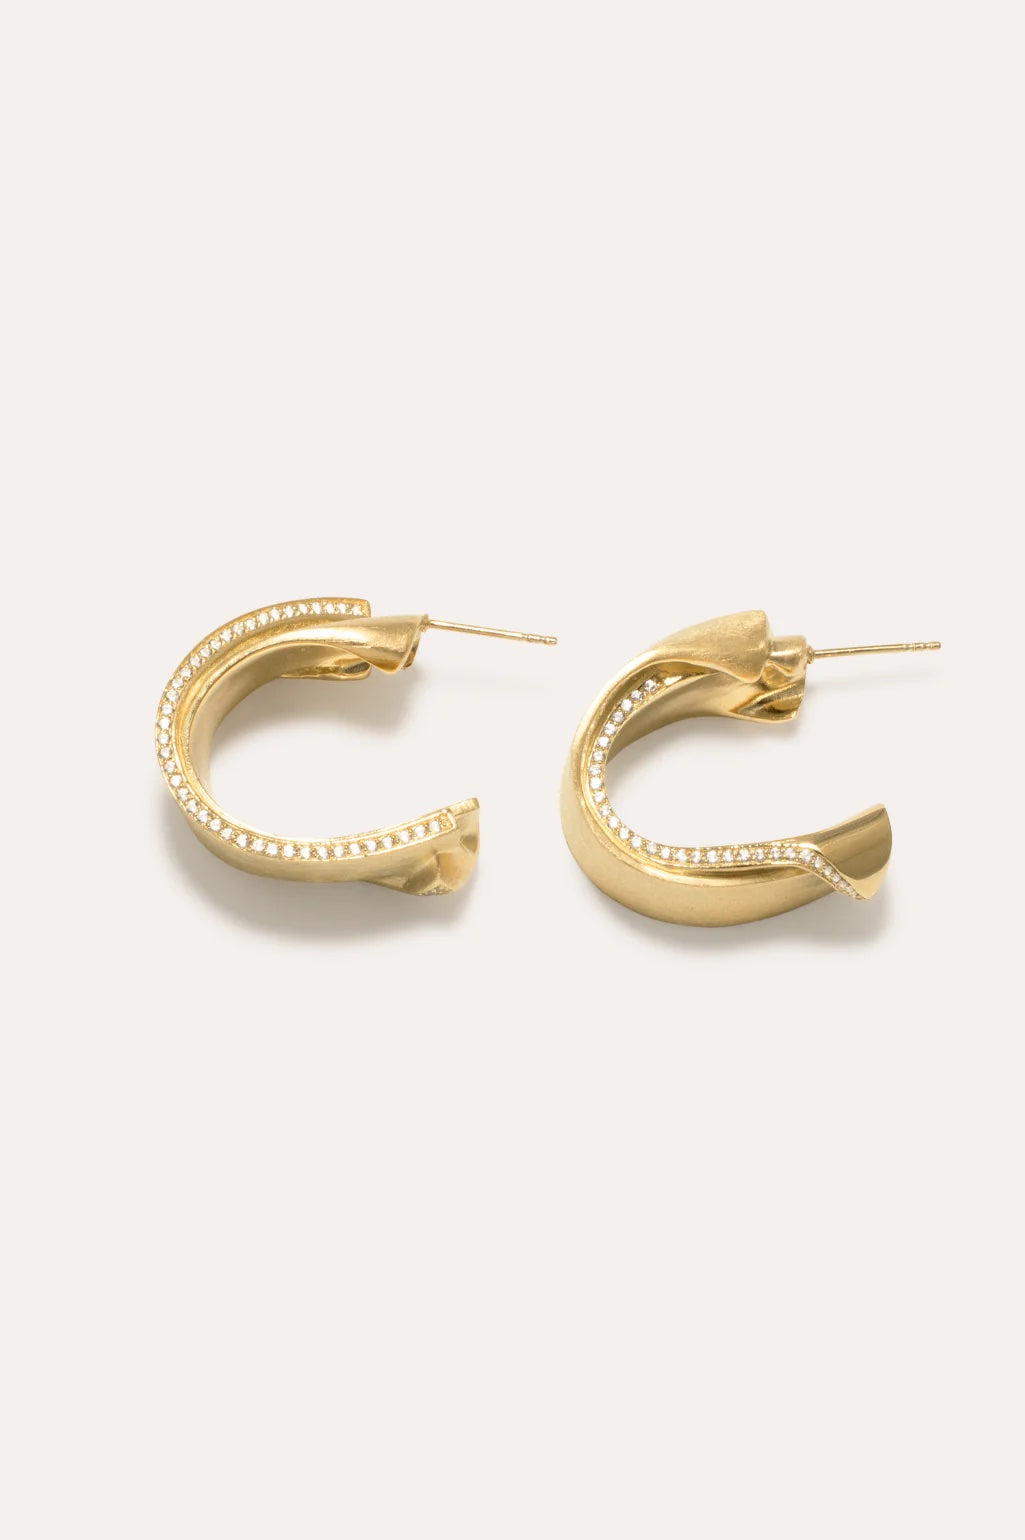 Completedworks Path Earrings Gold Plated With White Topaz – Opia